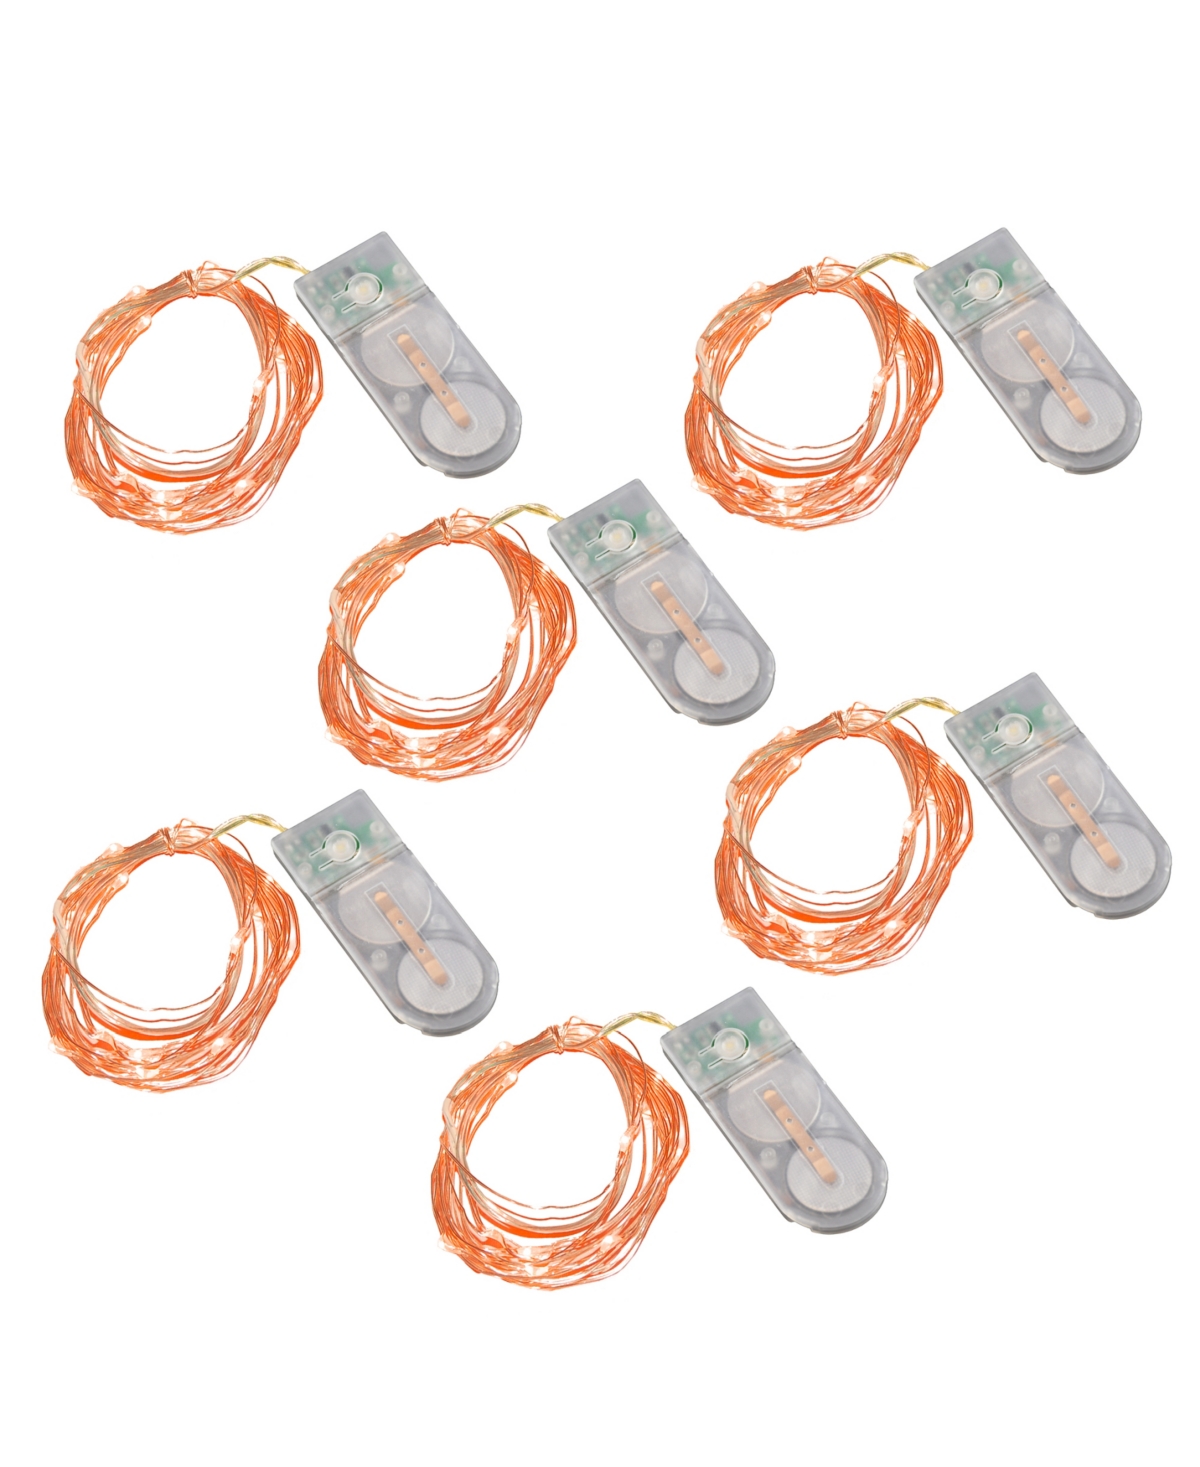 Jh Specialties Inc/lumabase Lumabase Battery Operated Fairy String Lights, Set Of 6 In Orange